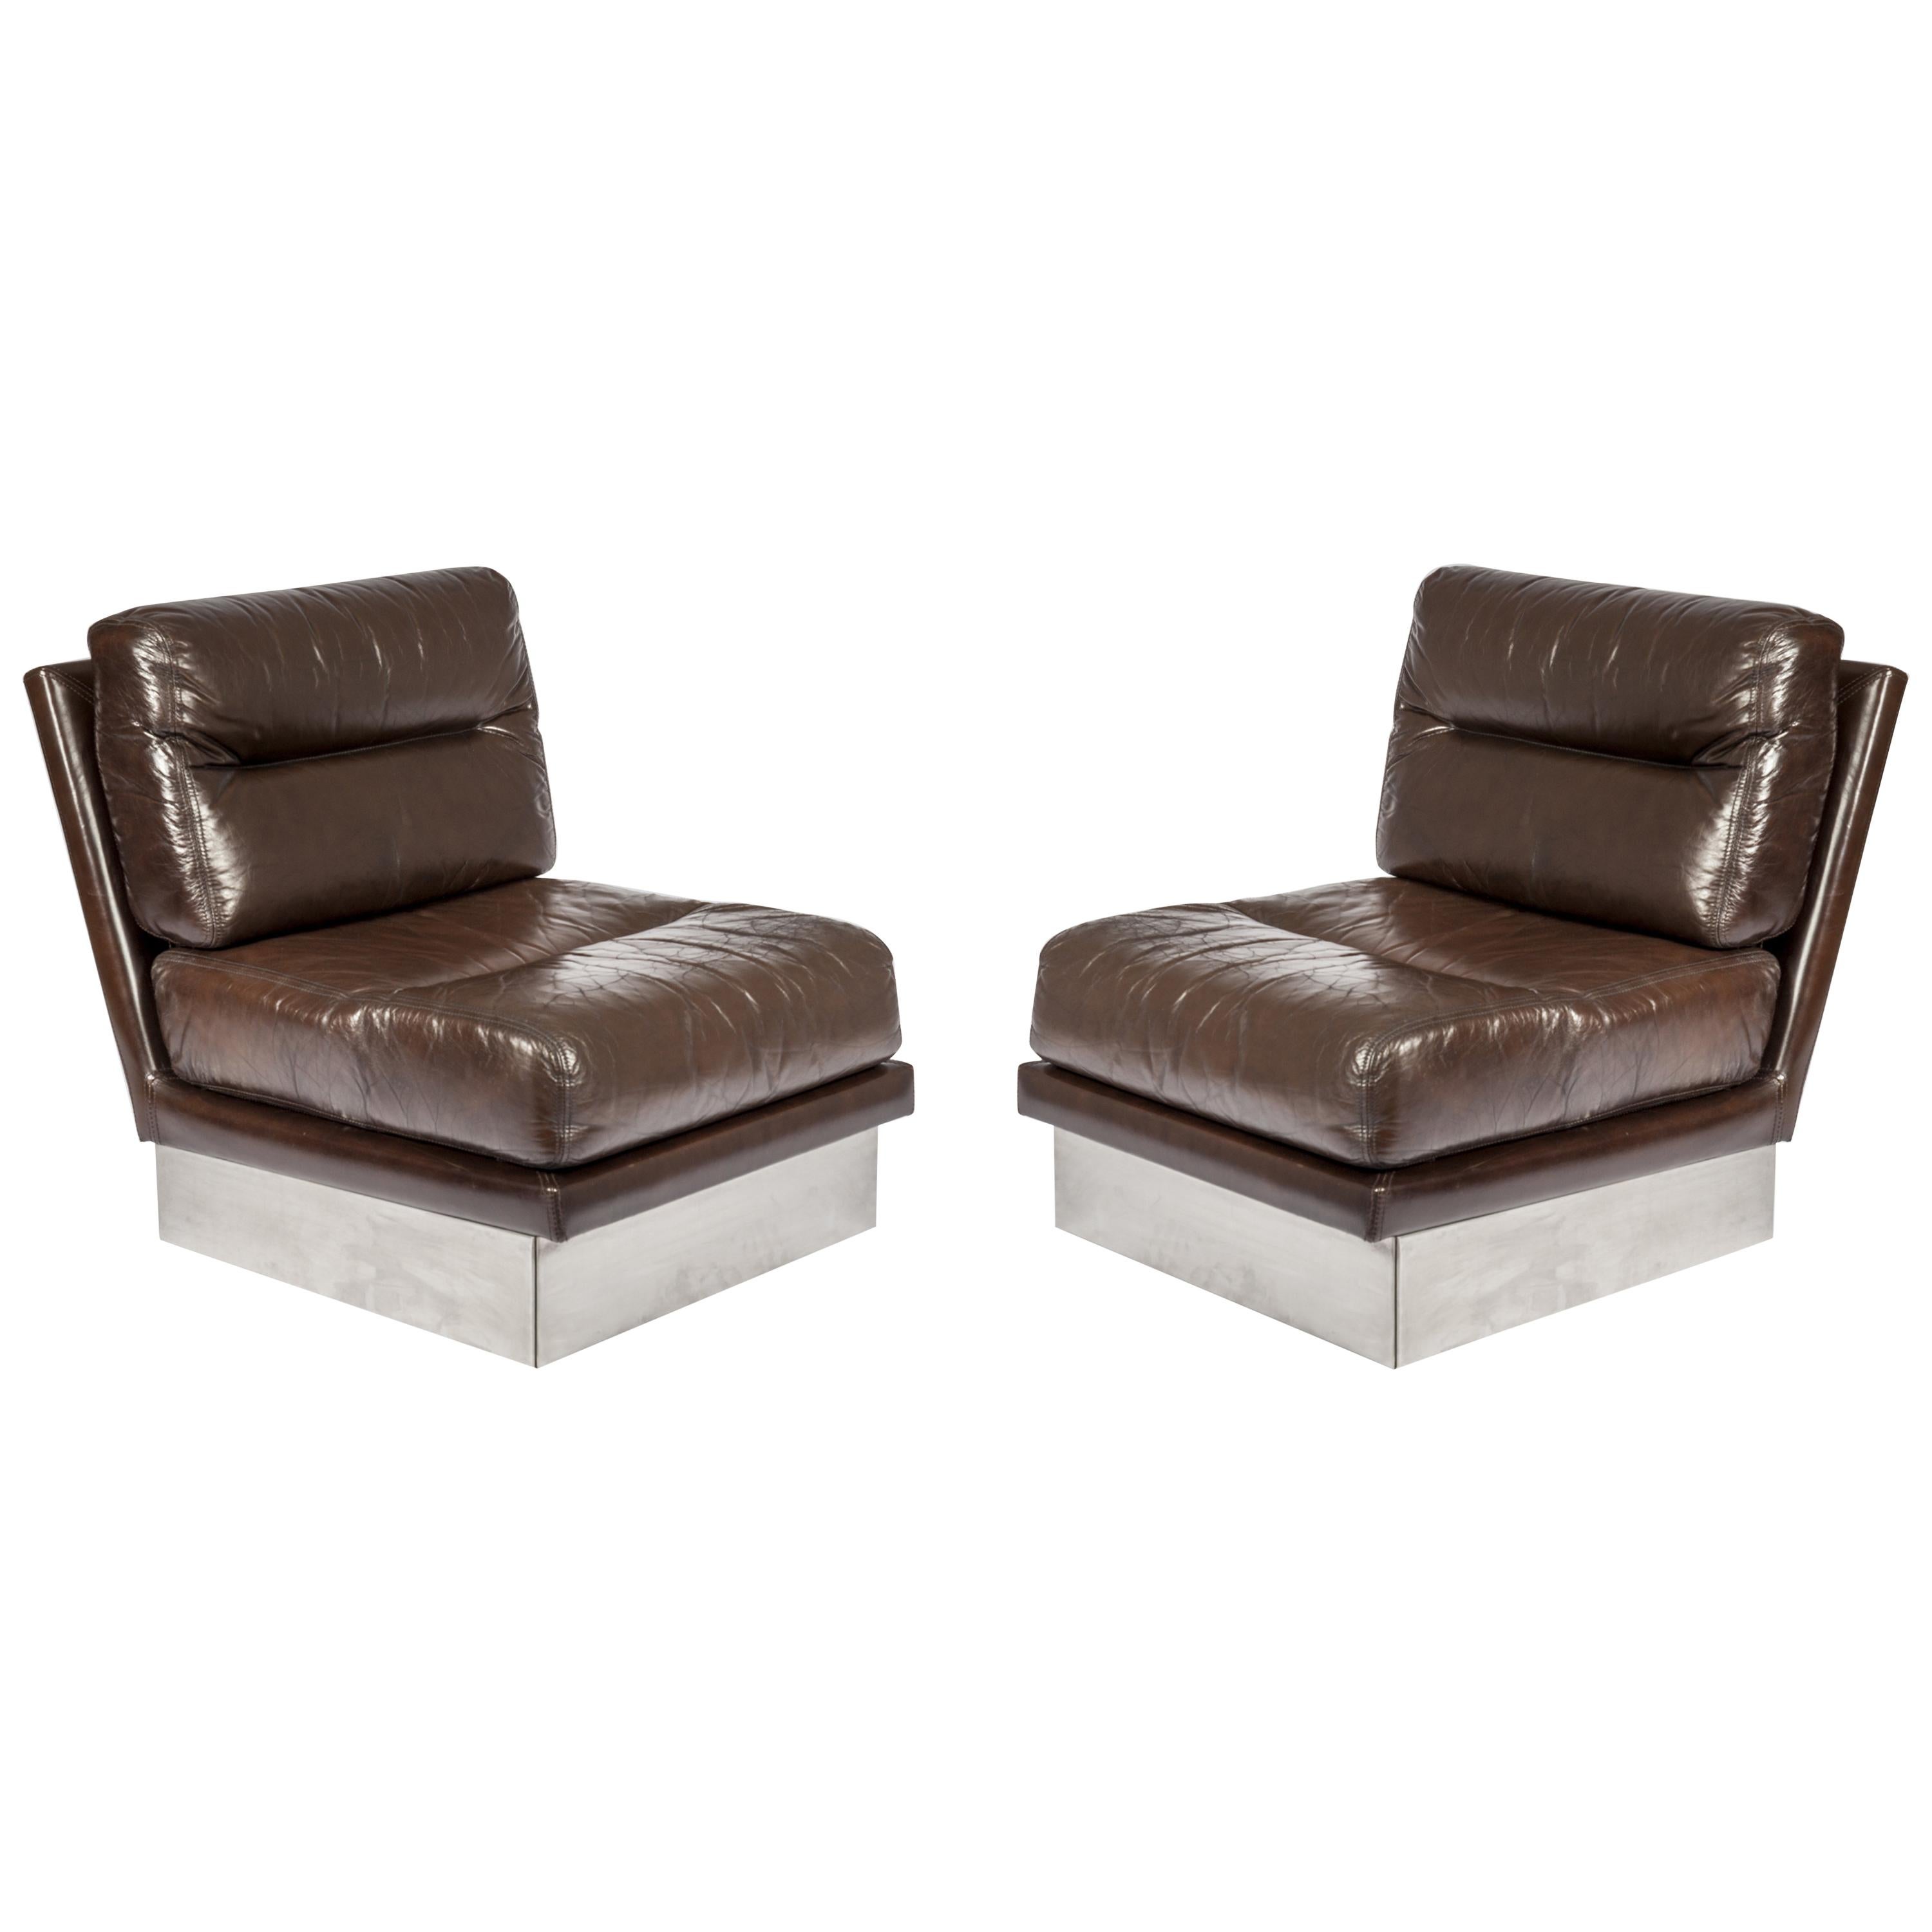 Pair of Seat in Brown Leather and Stainless Steel by Jacques Charpentier